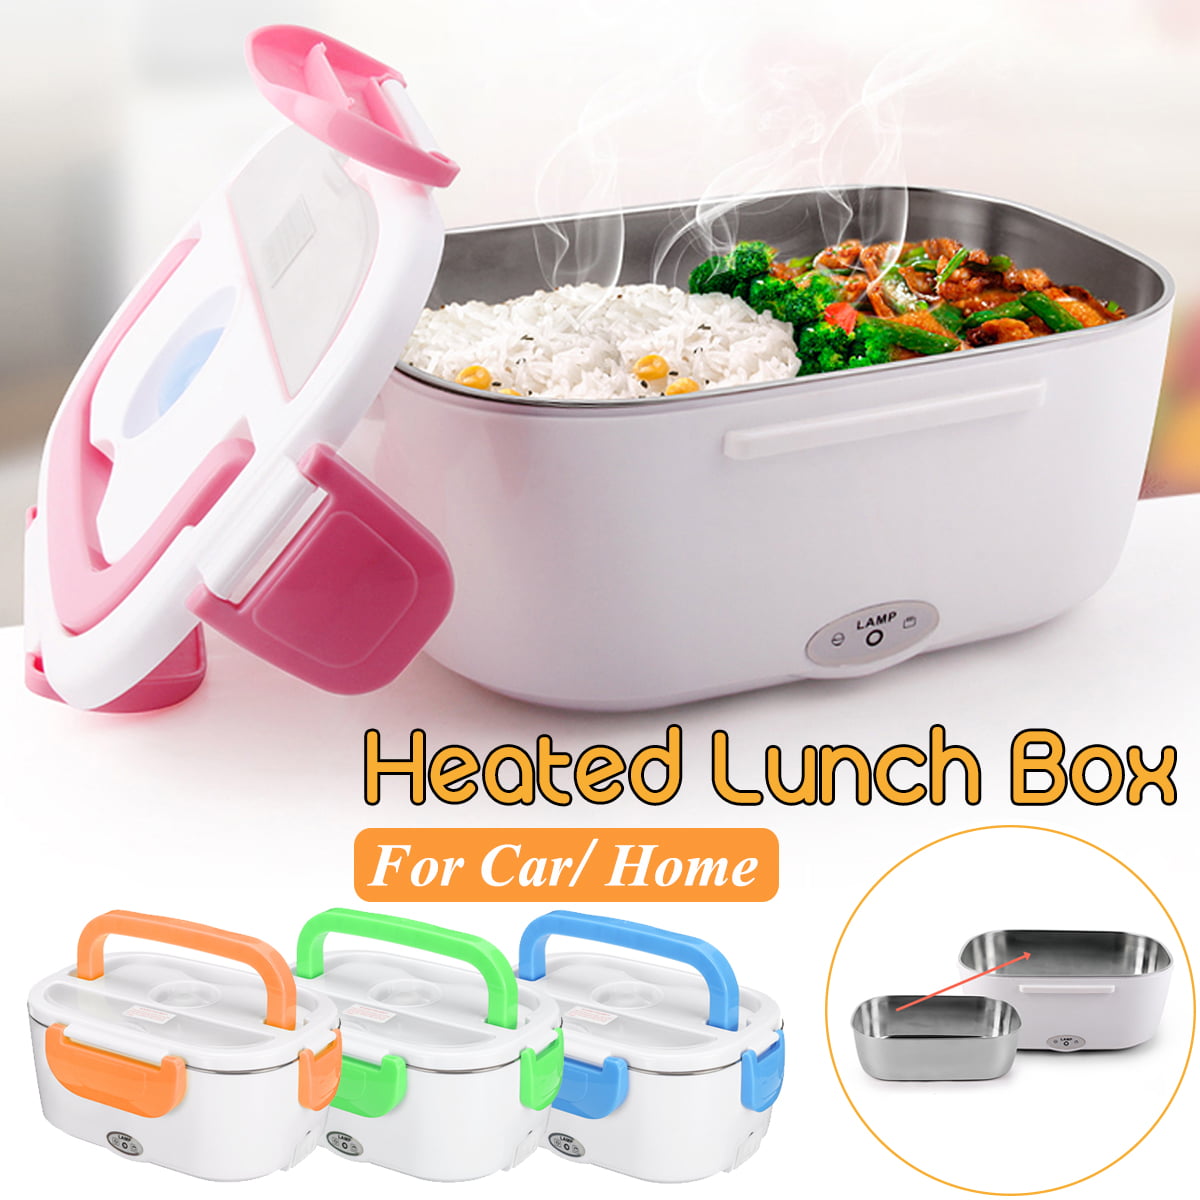 TRAVELISIMO Electric Lunch Box 2 in 1 Portable Food Warmer for Car and Home 